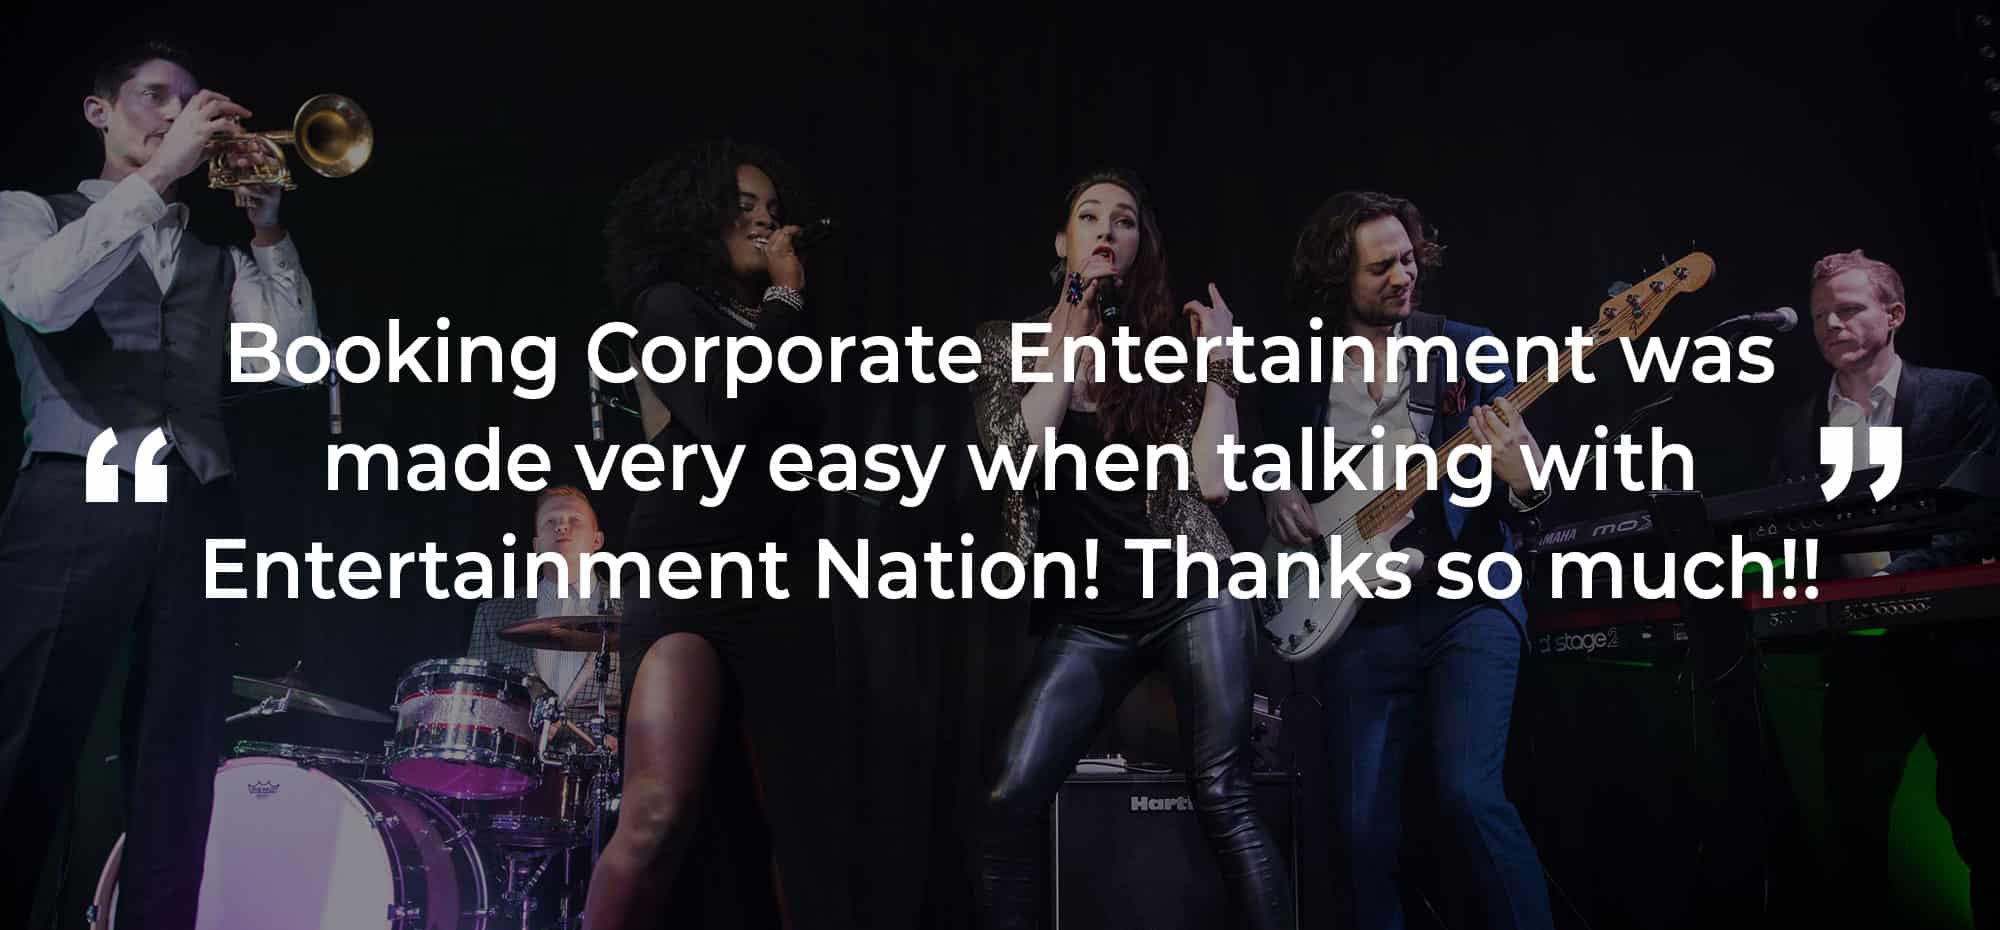 Review of Corporate Entertainment Bristol